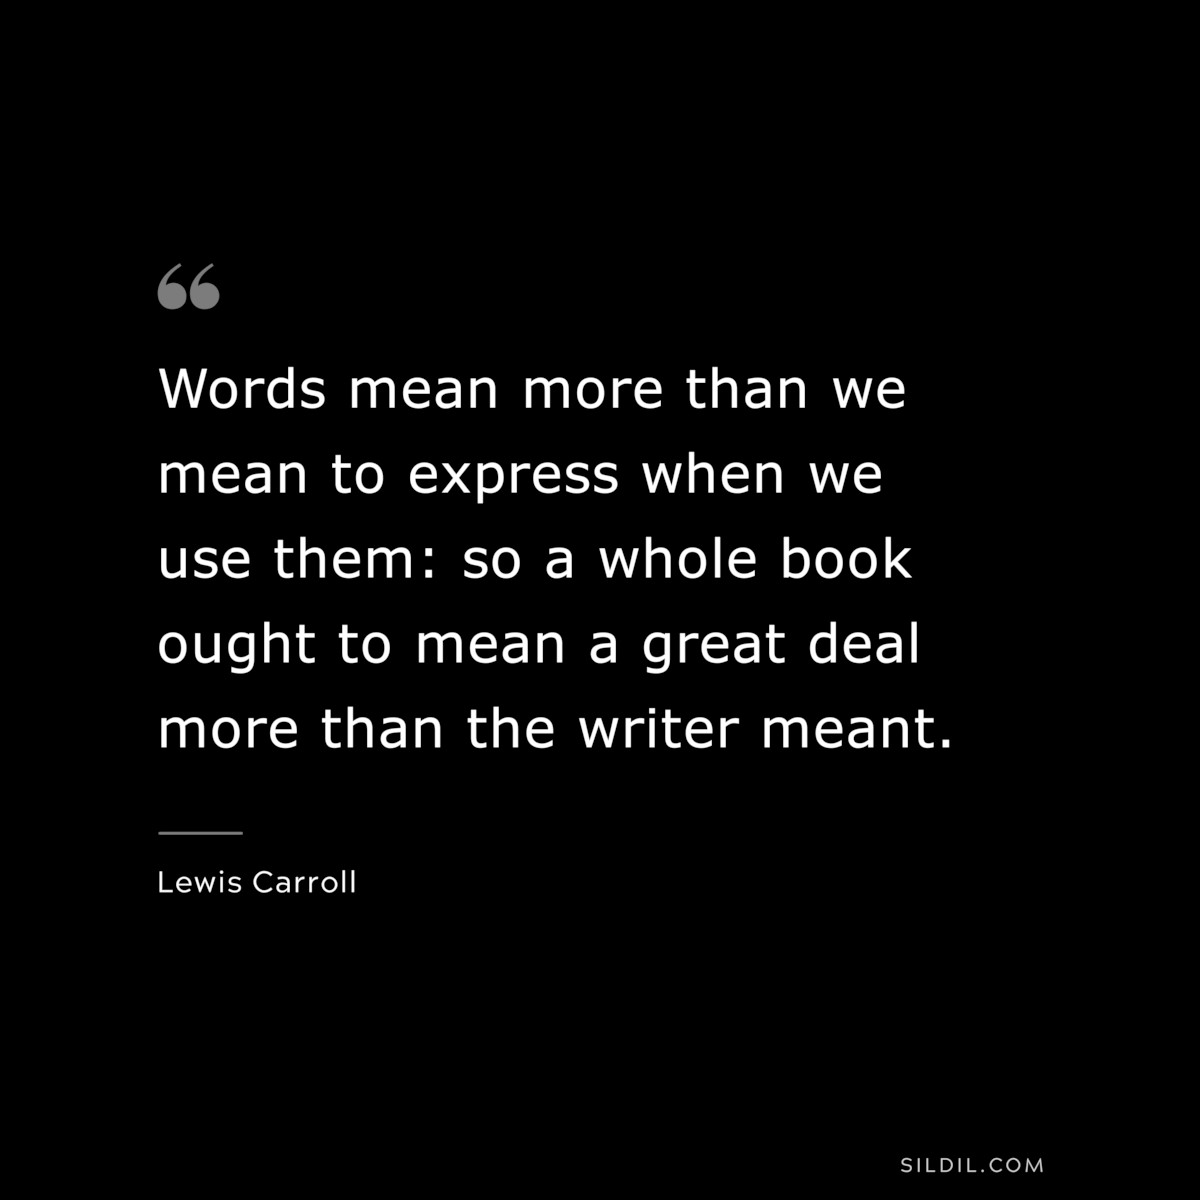 Words mean more than we mean to express when we use them: so a whole book ought to mean a great deal more than the writer meant.